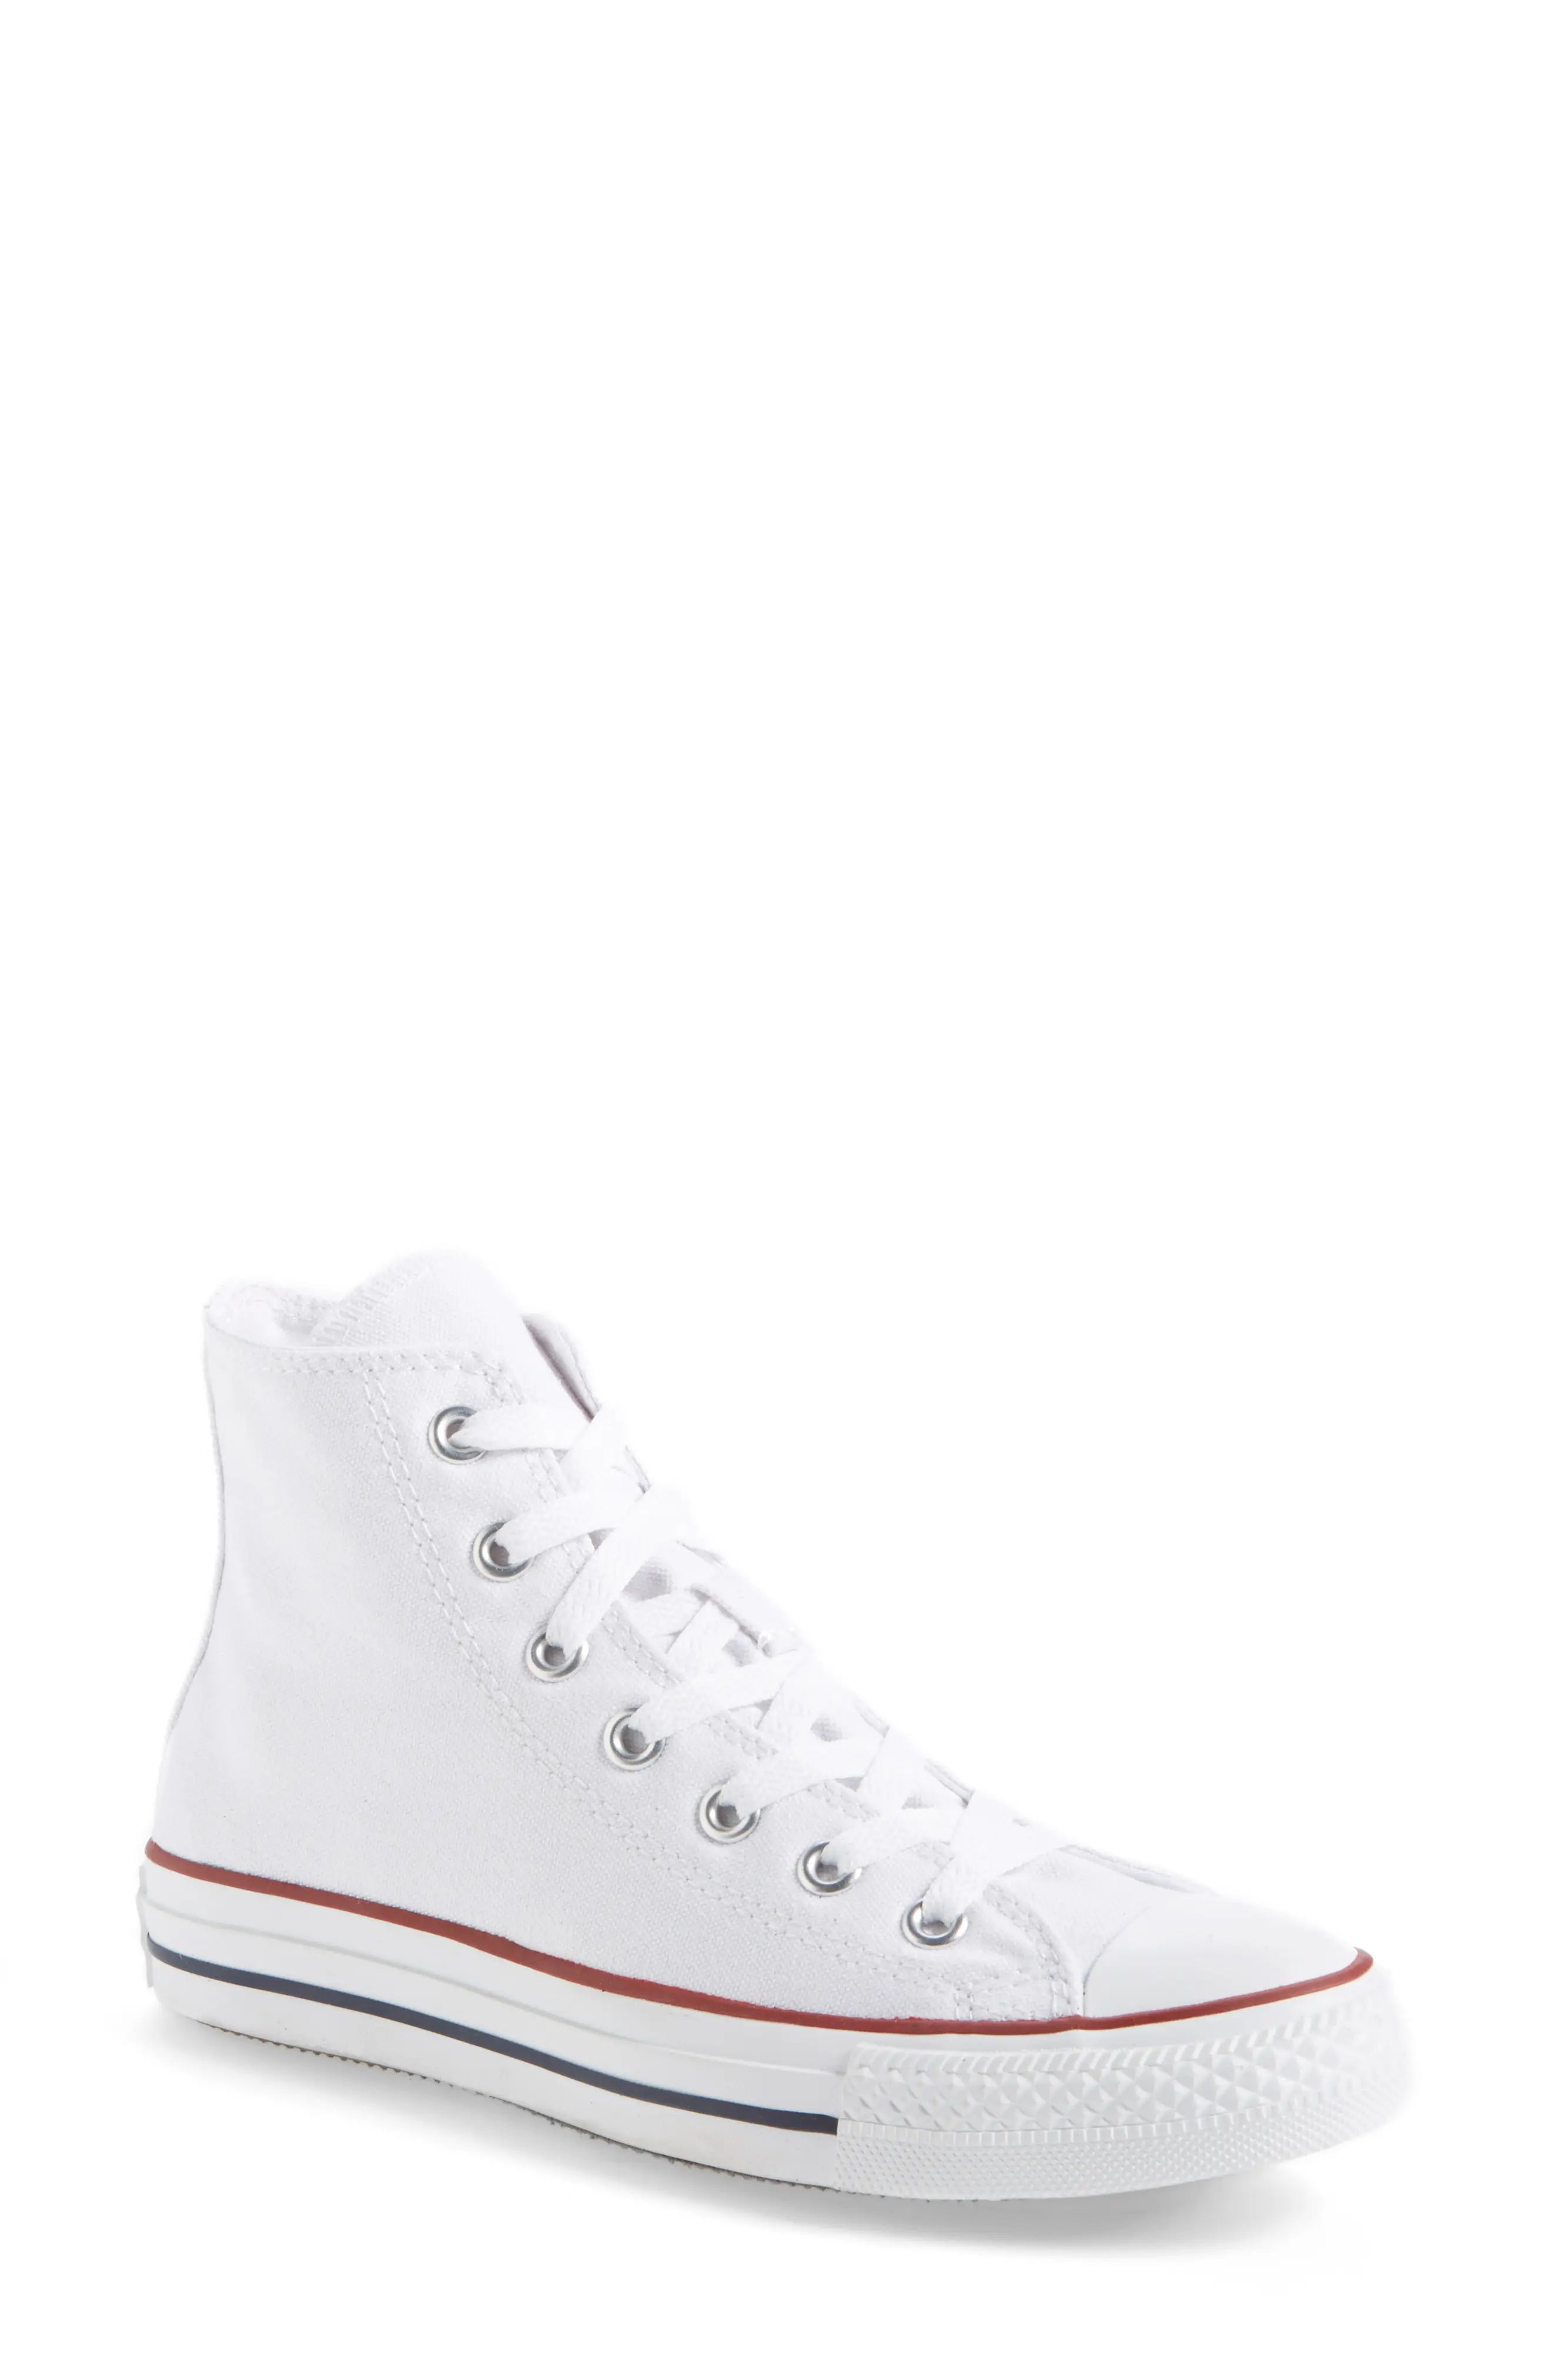 Converse Chuck Taylor(R) High Top Sneaker in Optic White at Nordstrom, Size 9 Women's | Nordstrom